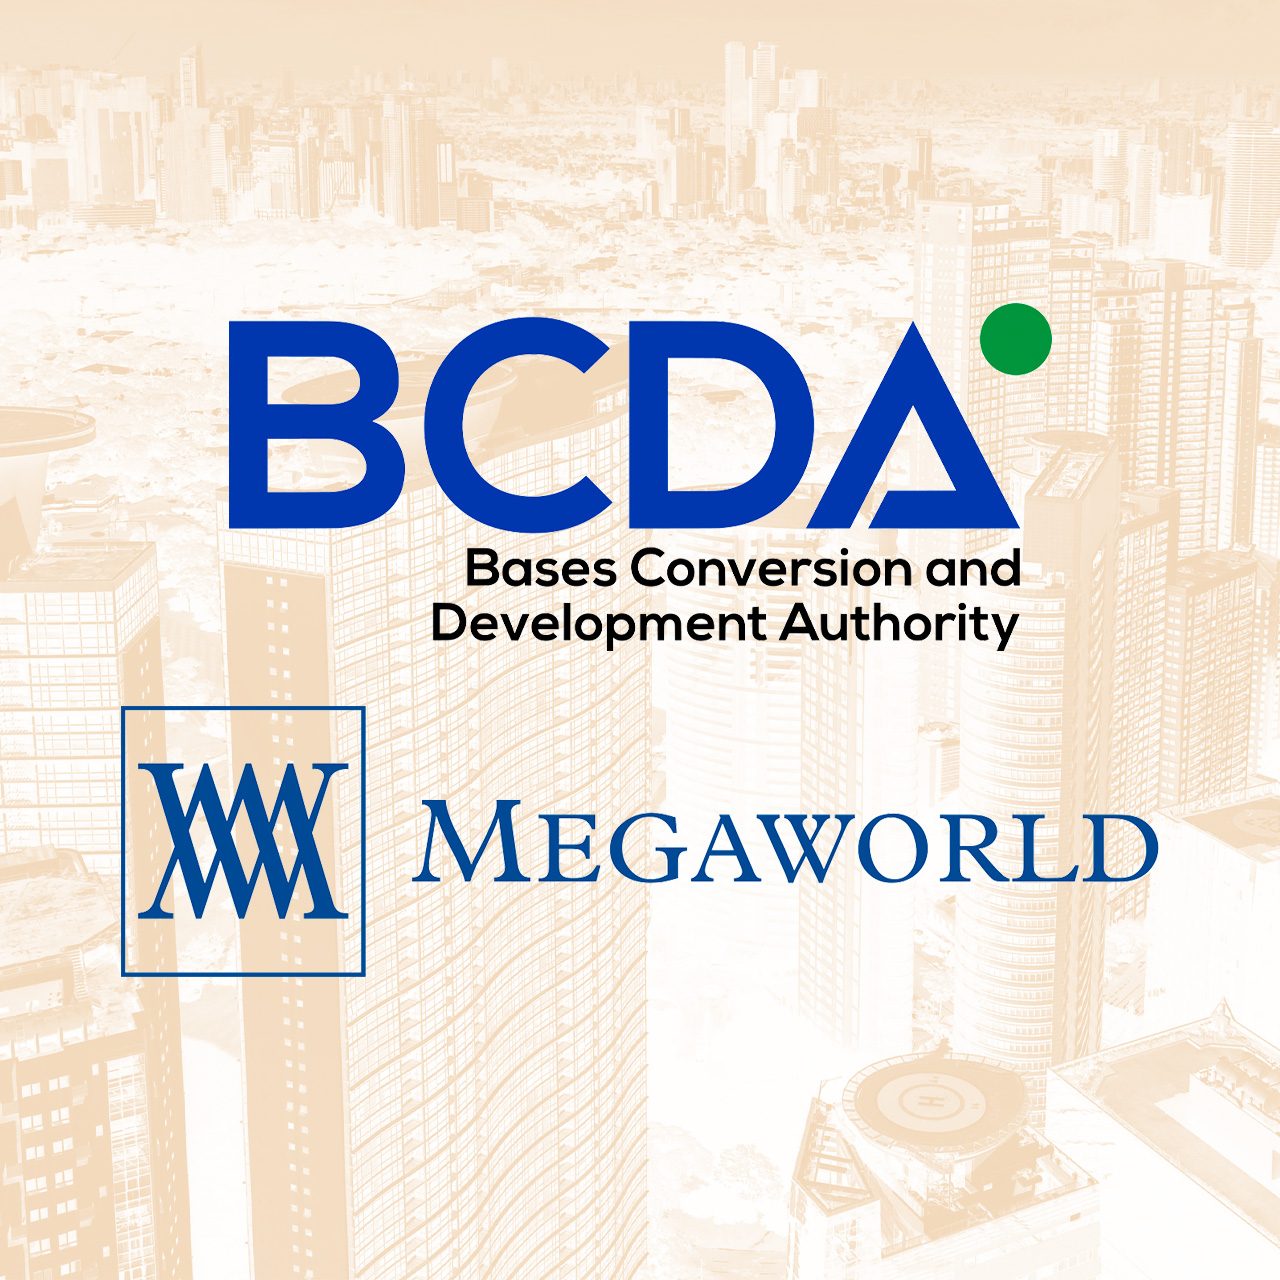 COA: BCDA failed to collect P2.6B from Megaworld for BGC project in 2020